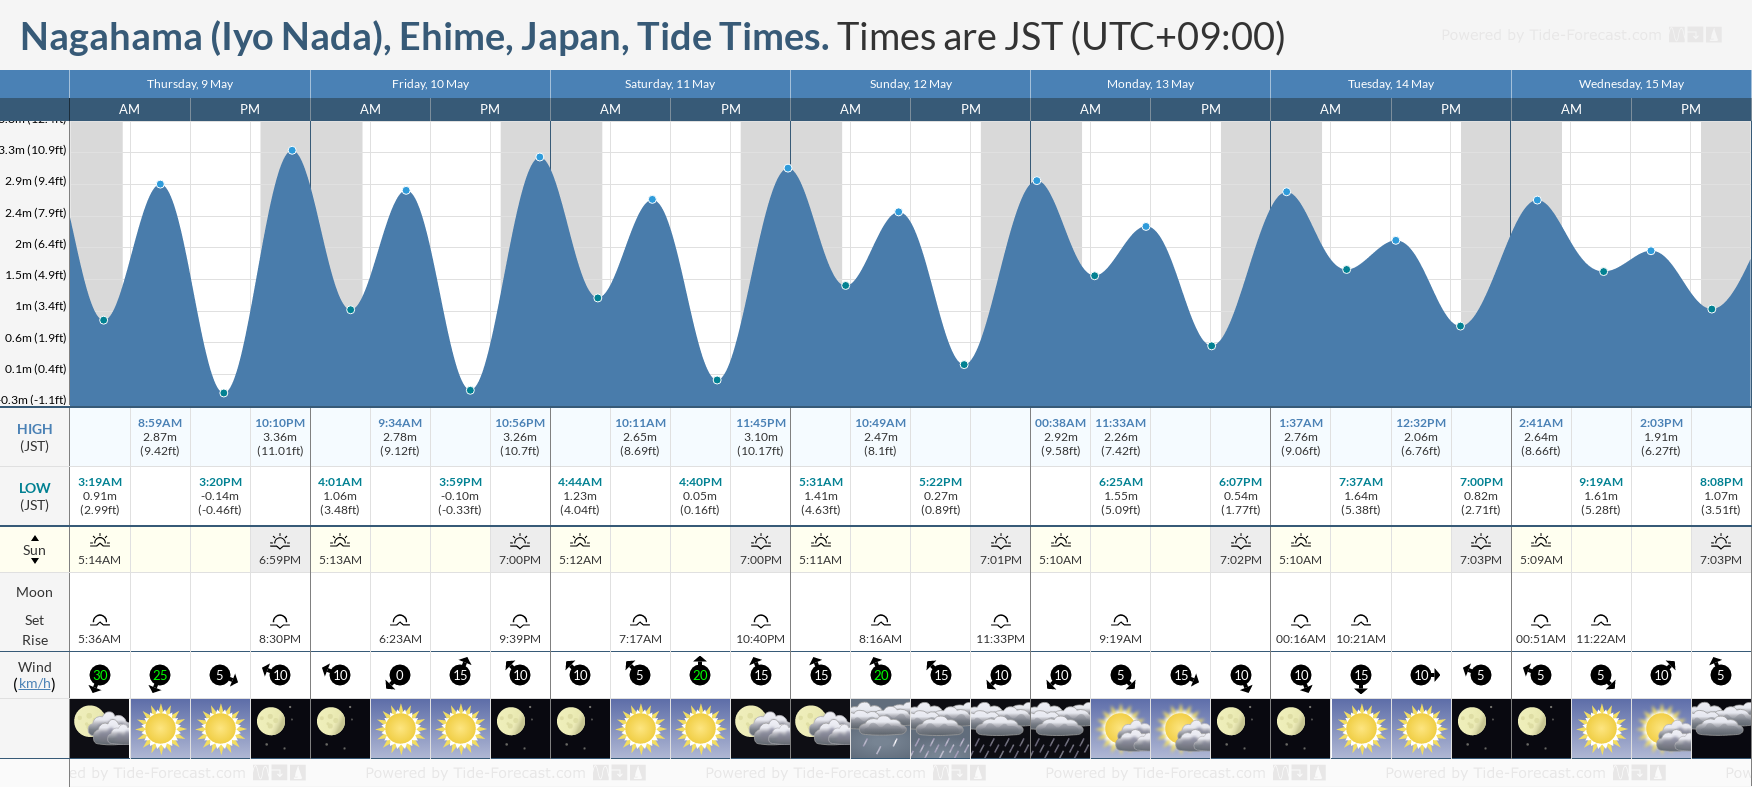 Nagahama (Iyo Nada), Ehime, Japan Tide Chart including high and low tide tide times for the next 7 days